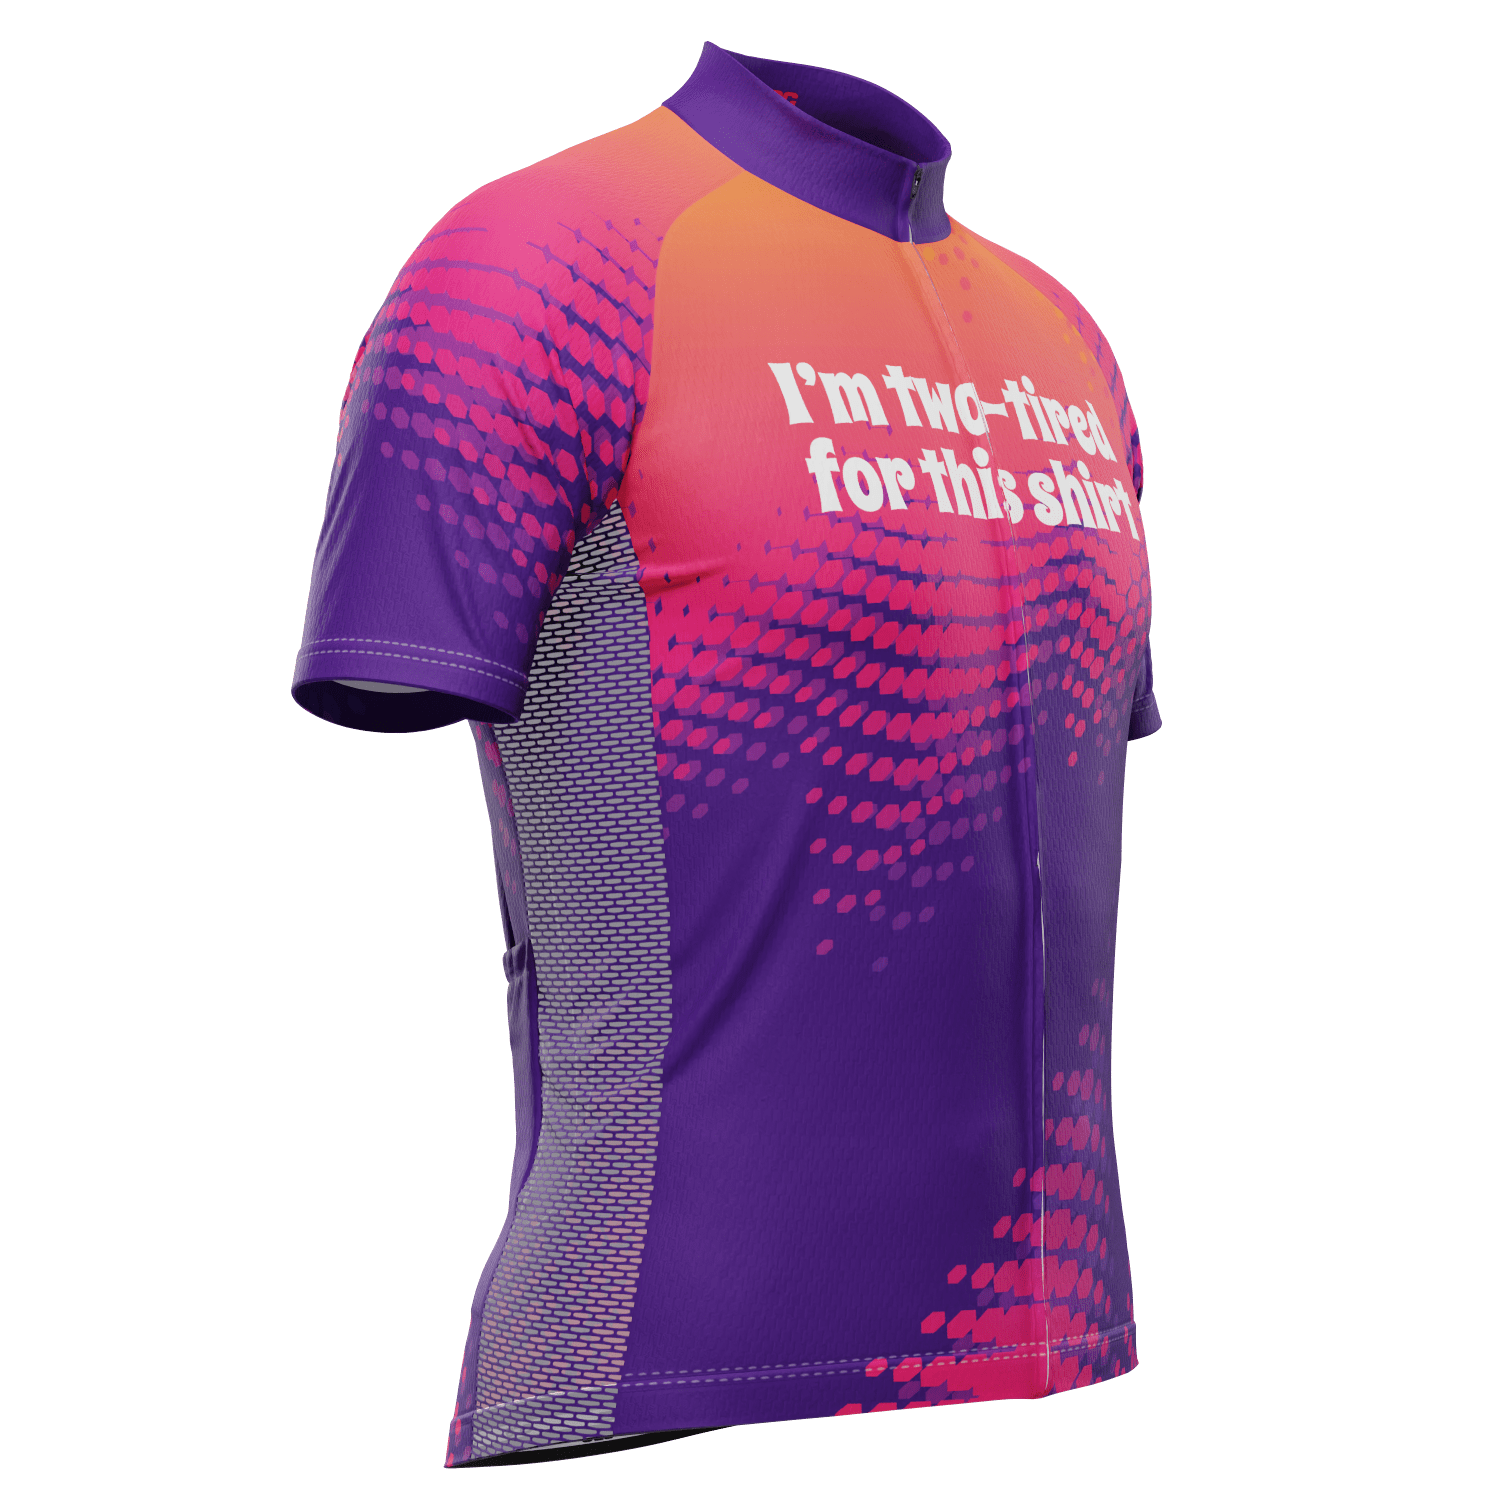 Men's I'm Two-tired For This Shirt! Short Sleeve Cycling Jersey